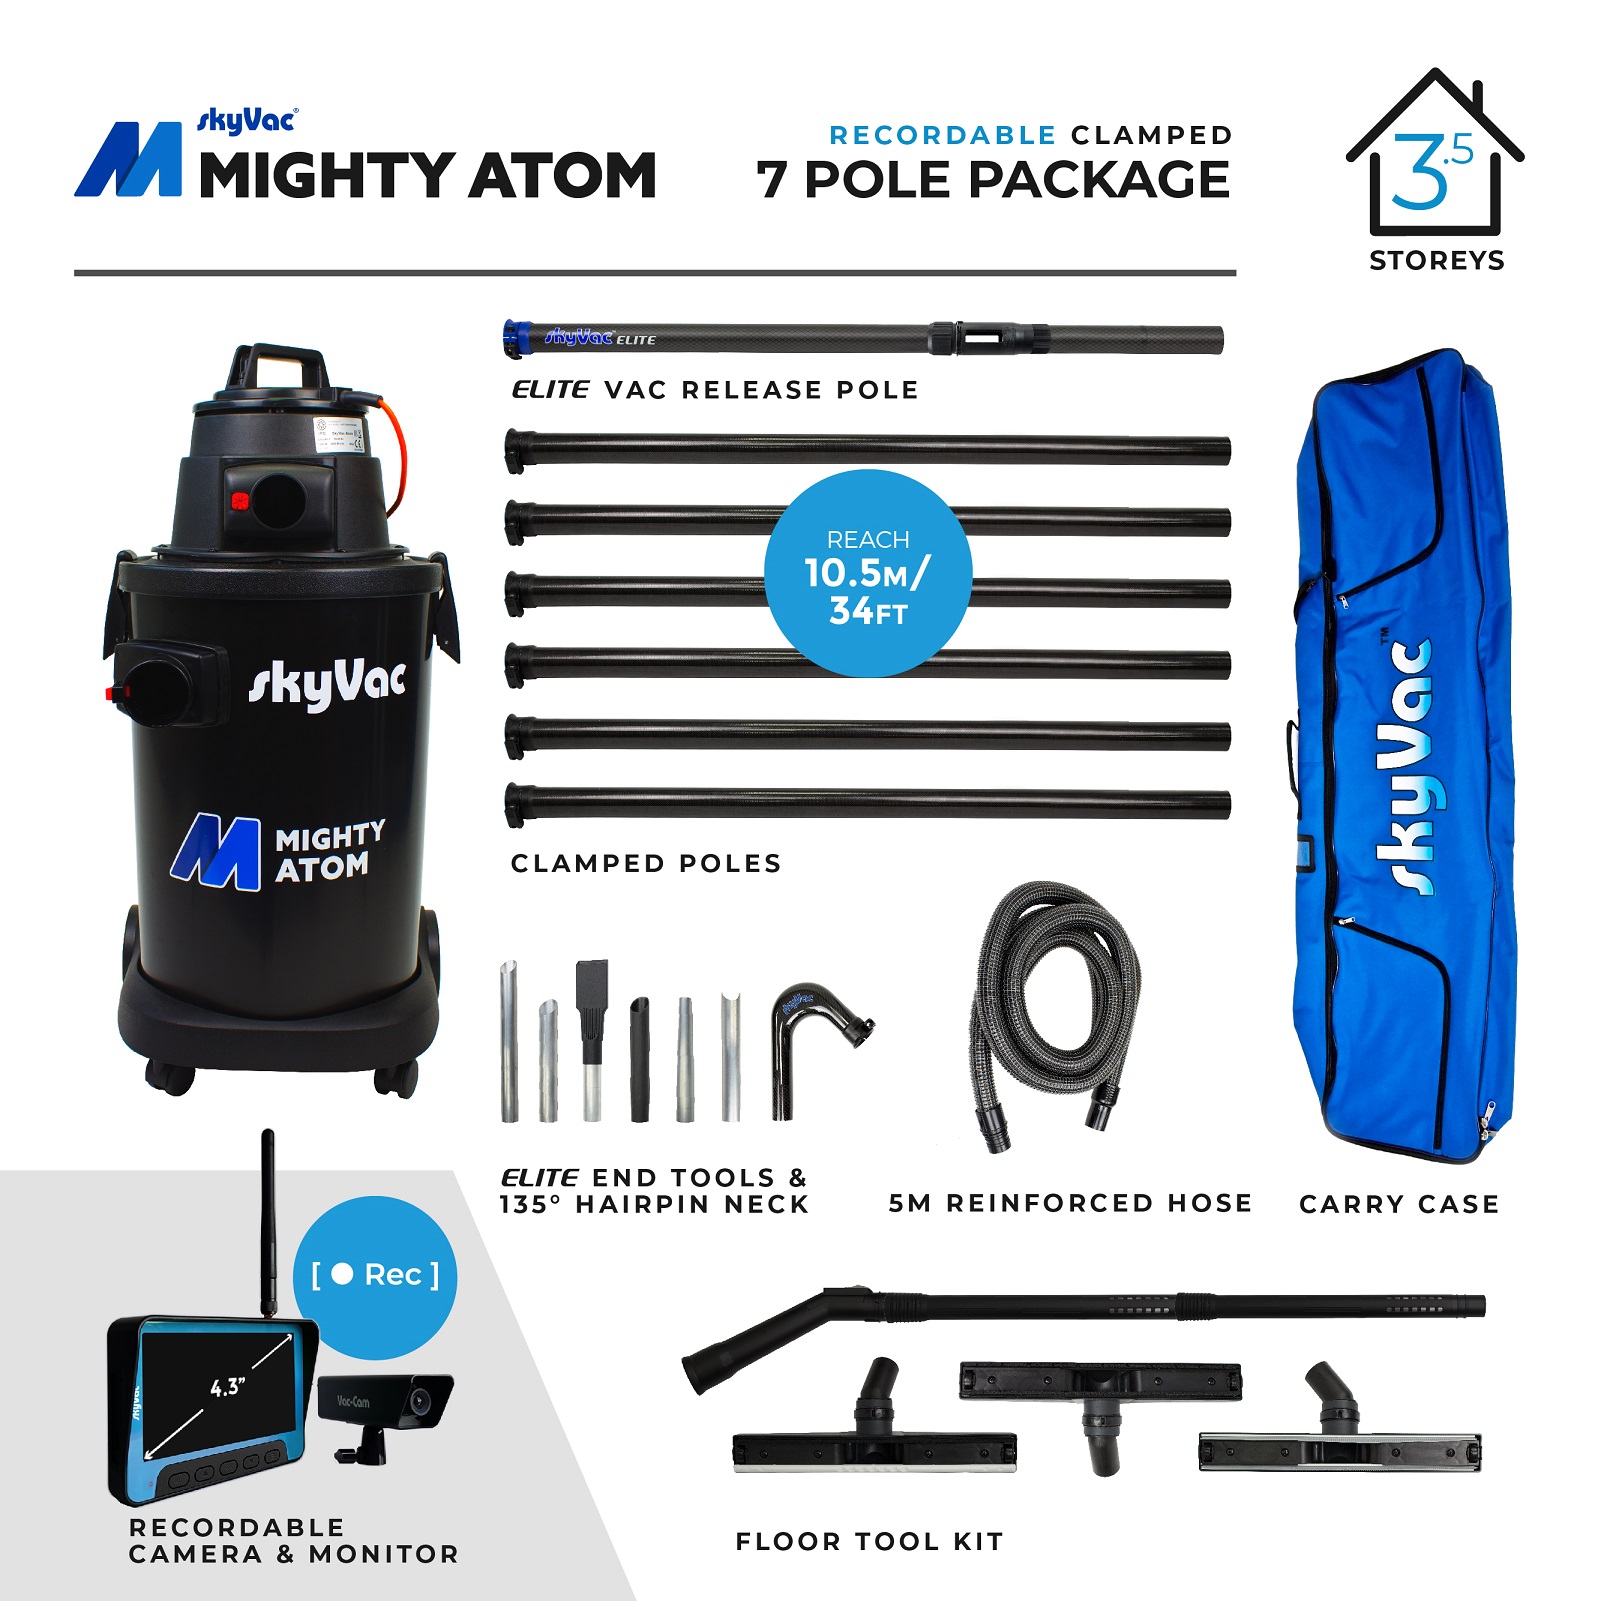 The skyVac Atom hire package is great for exterior cleaning specialists. With a 7 pole clamped pole set, Mighty Atom, a telescopic pole & recordable camera.